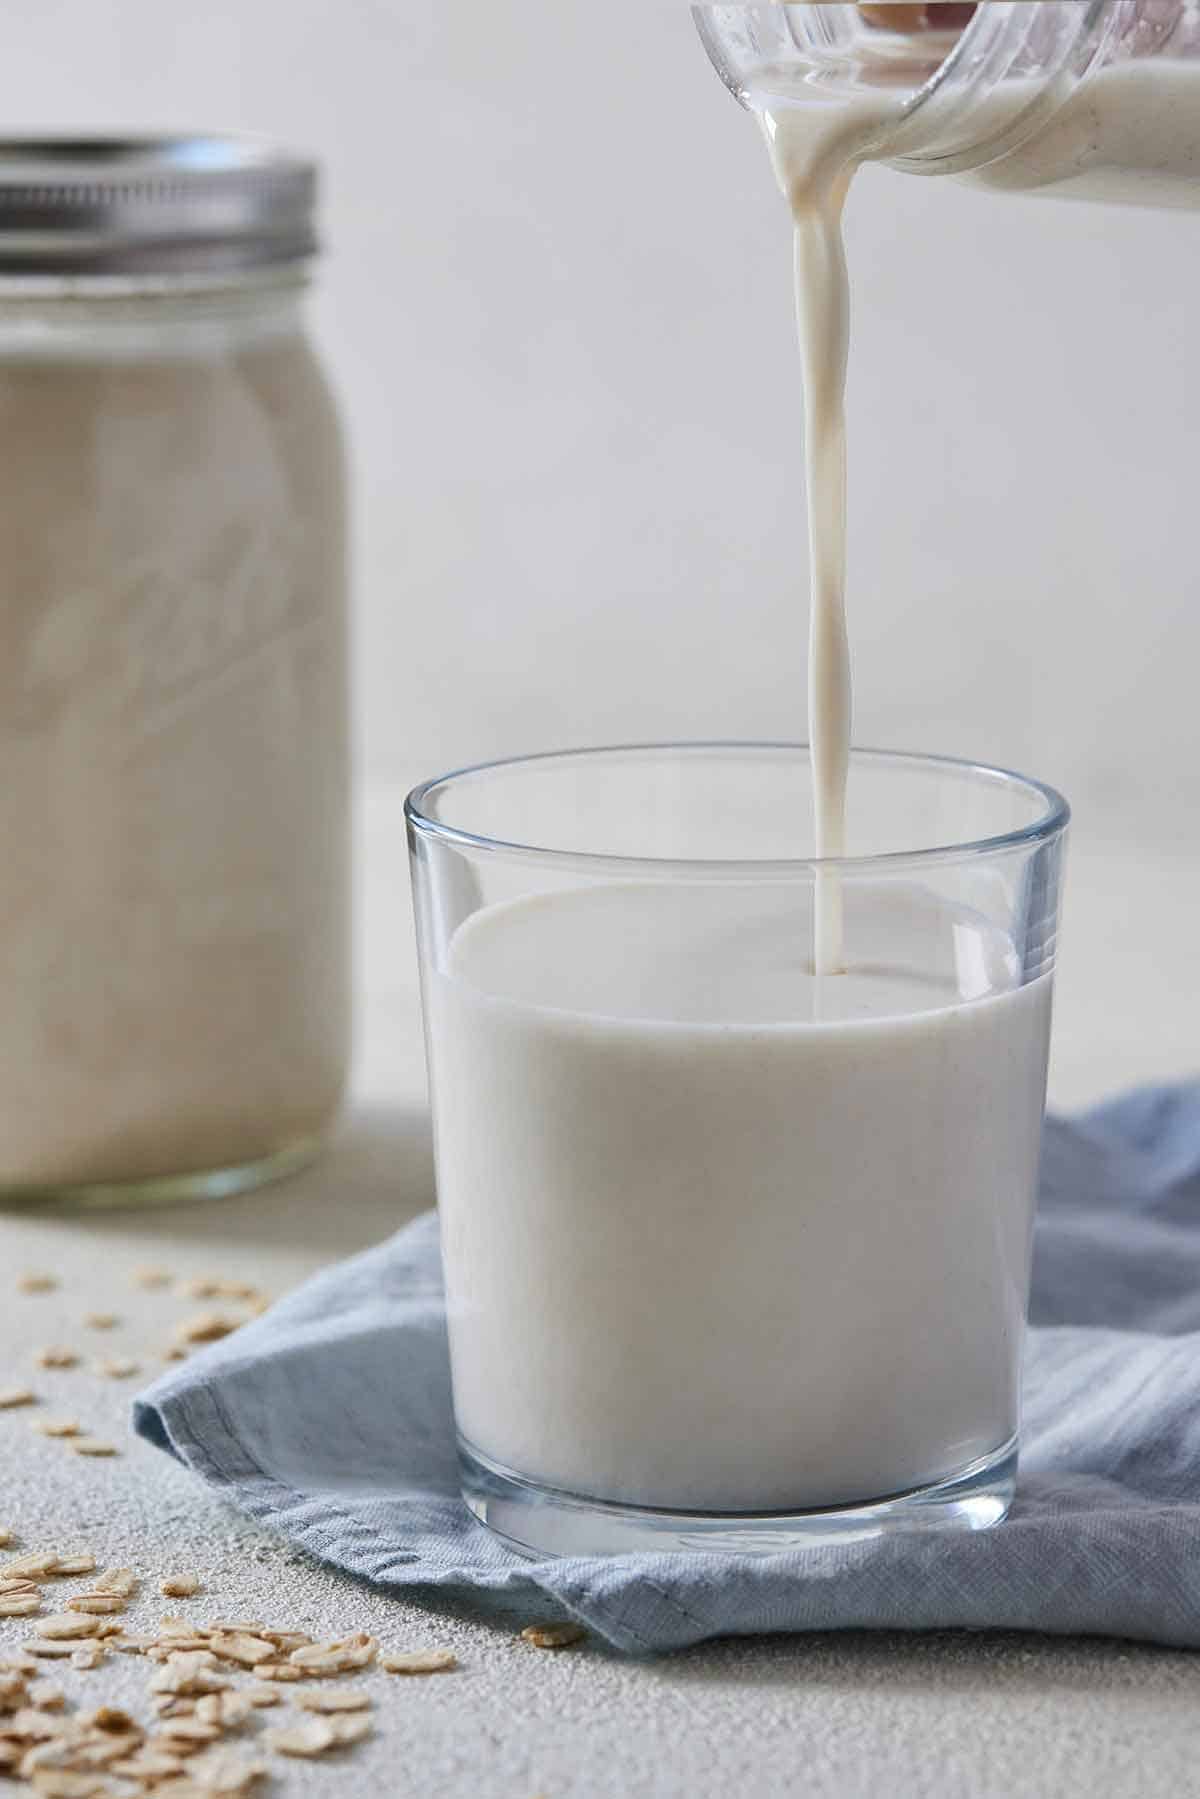 A glass with oat milk poured in it with a full mason jar of oat milk in the background.